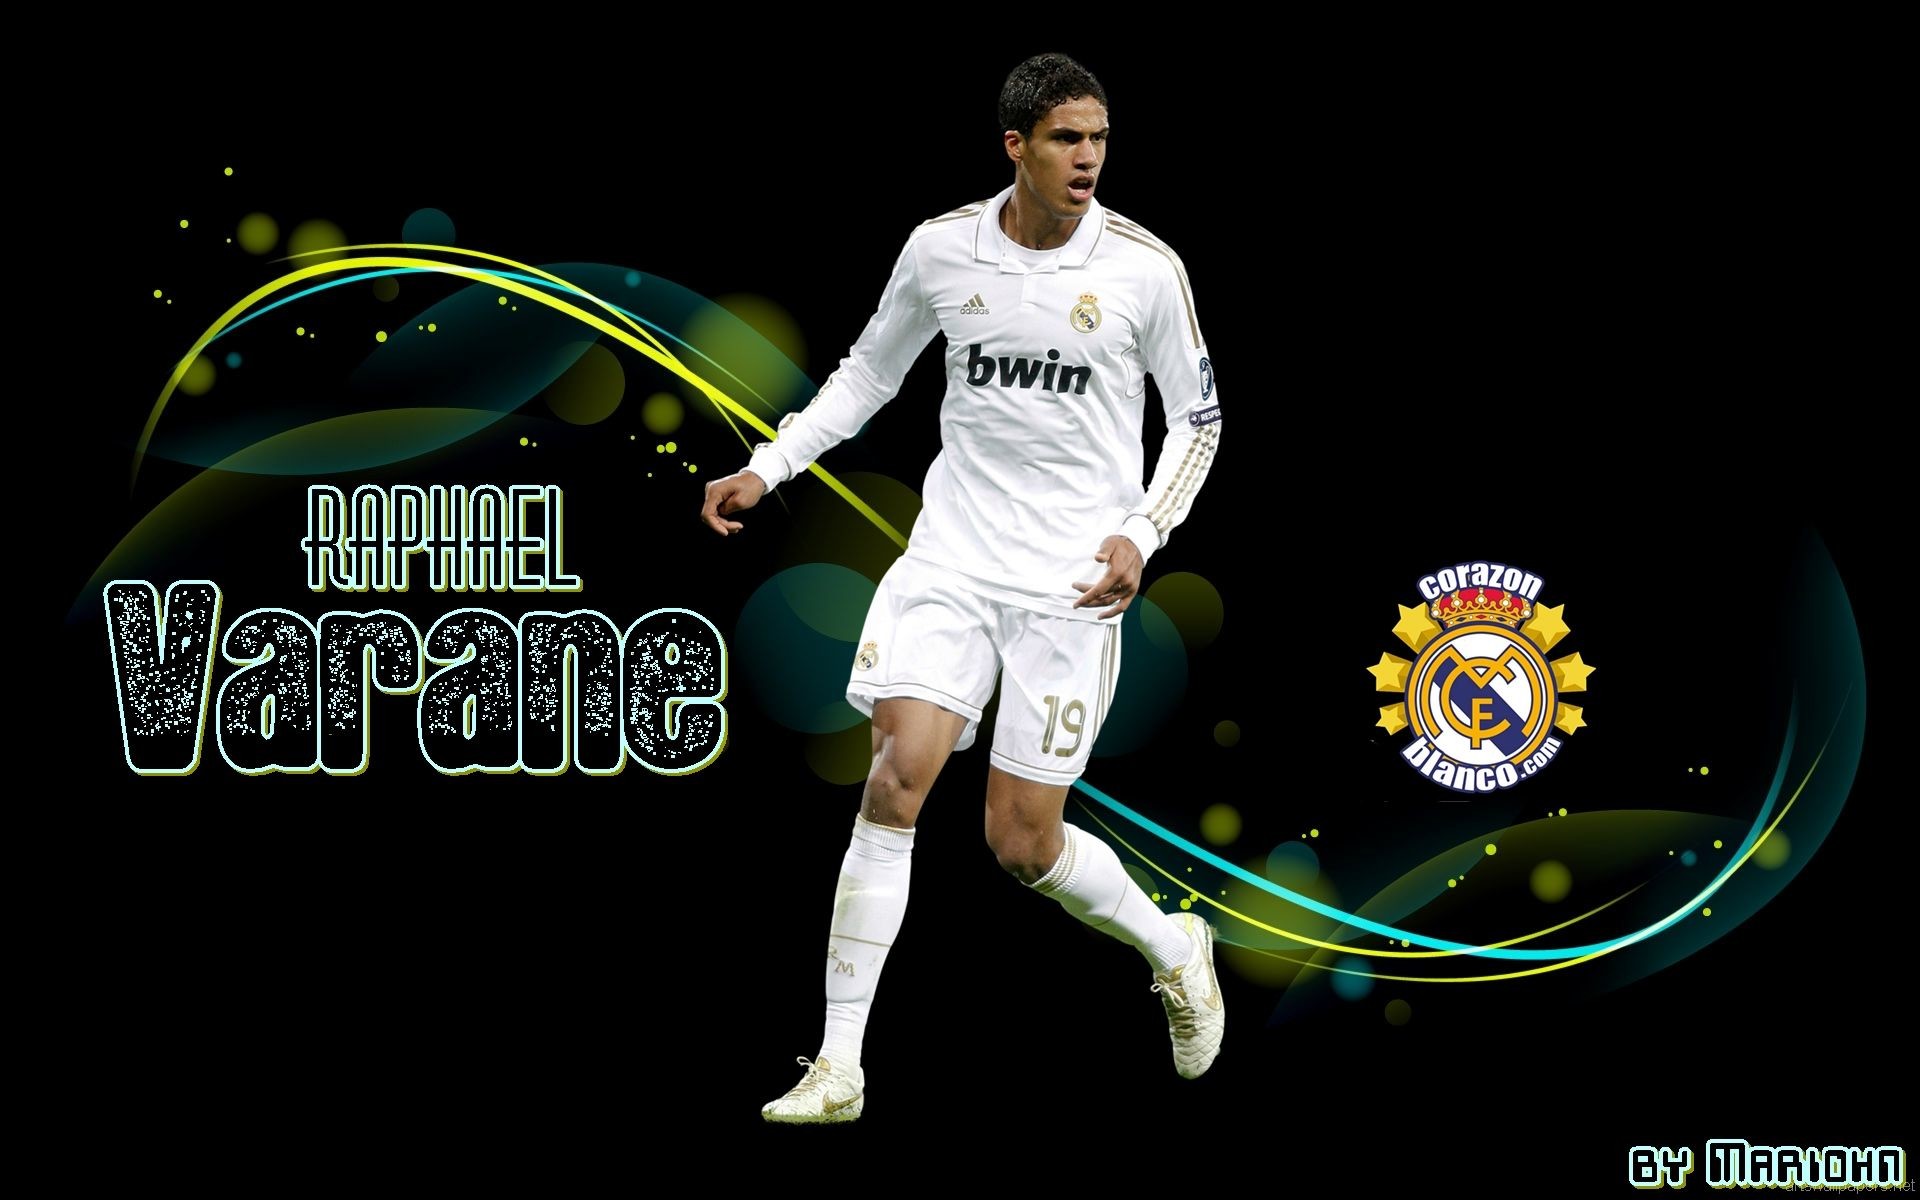 Raphal Varane is a French professional footballer who plays as a centre back for Spanish club Real Madrid and the France national team